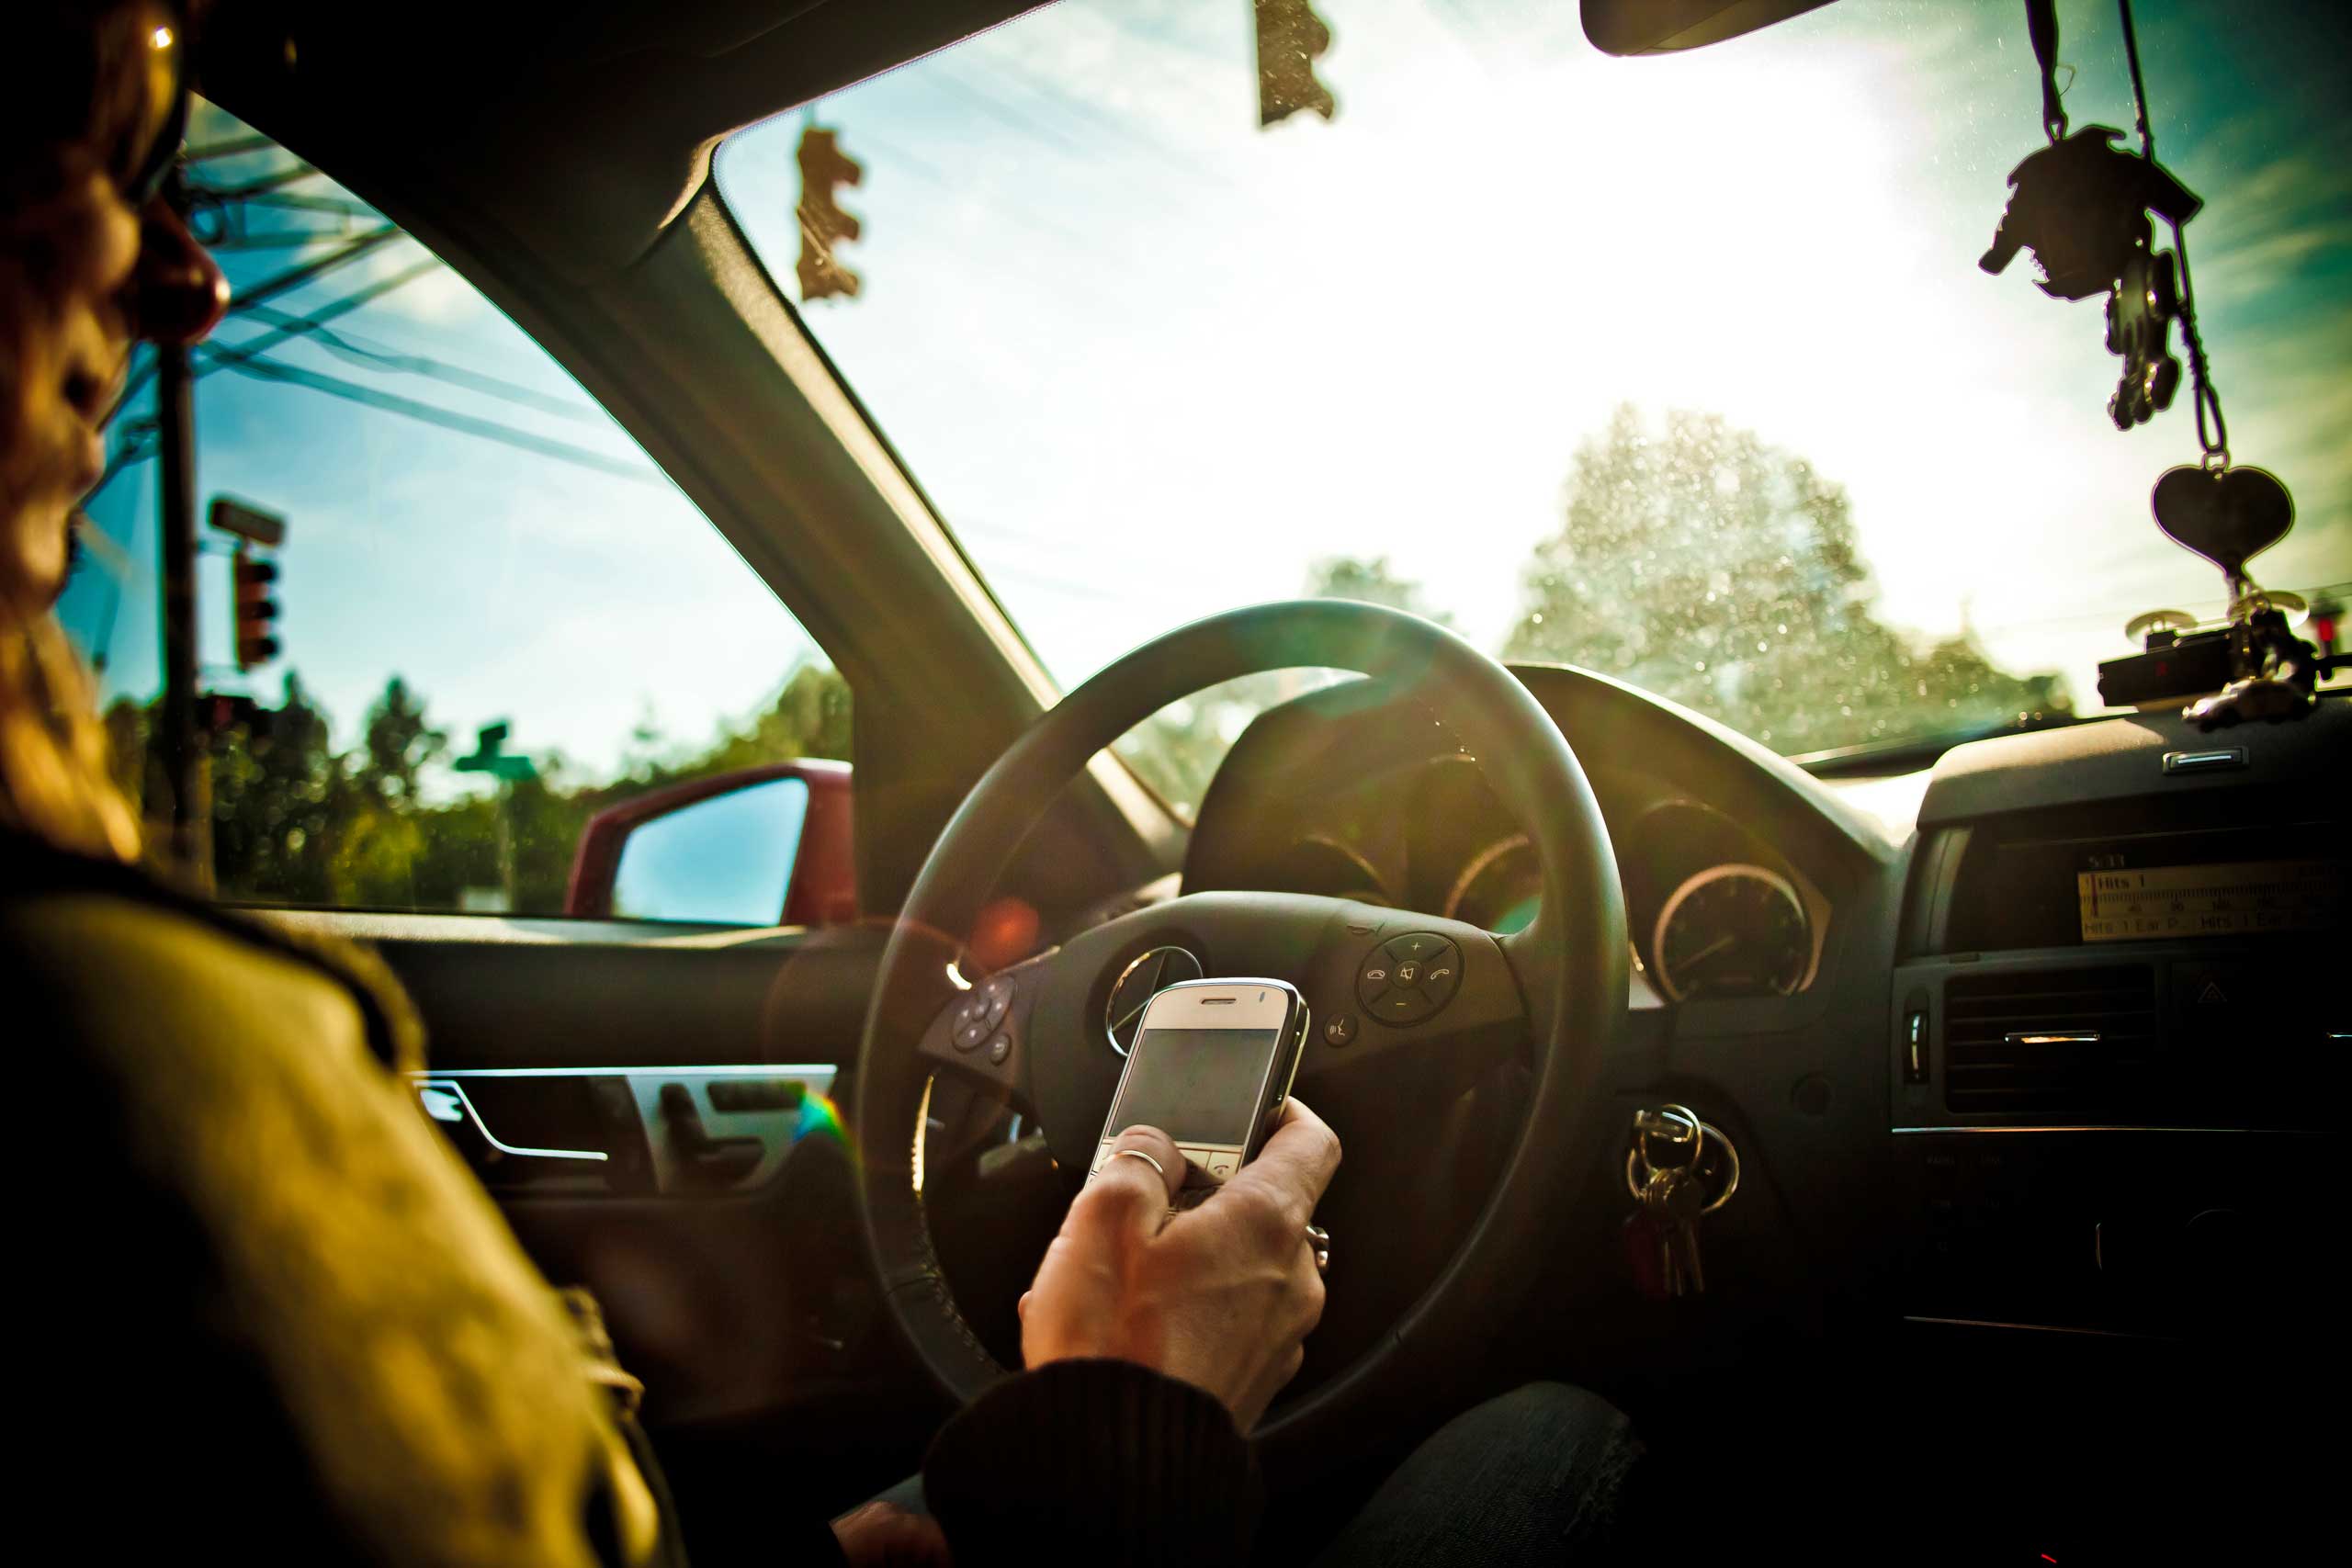 A stock image of a woman texting while driving a car